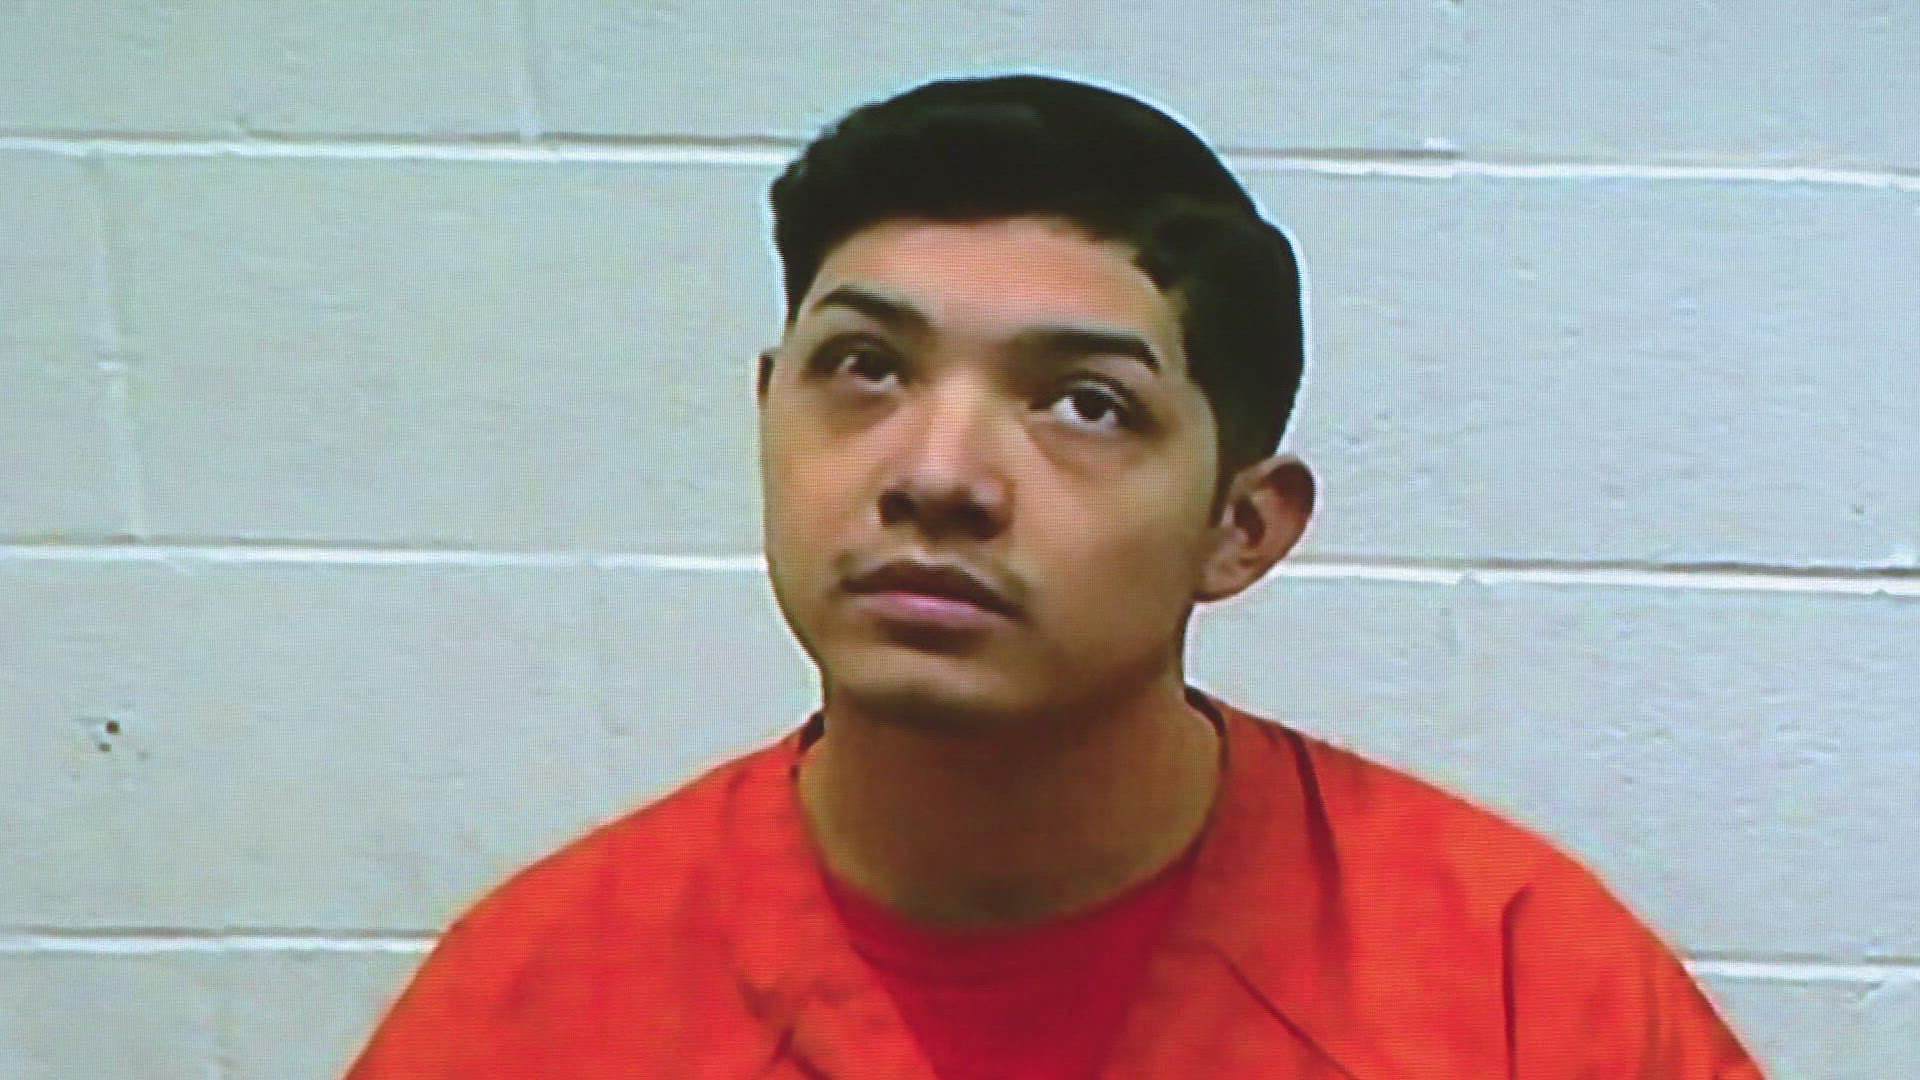 Marco Castro is being held on a $100,000 bond.